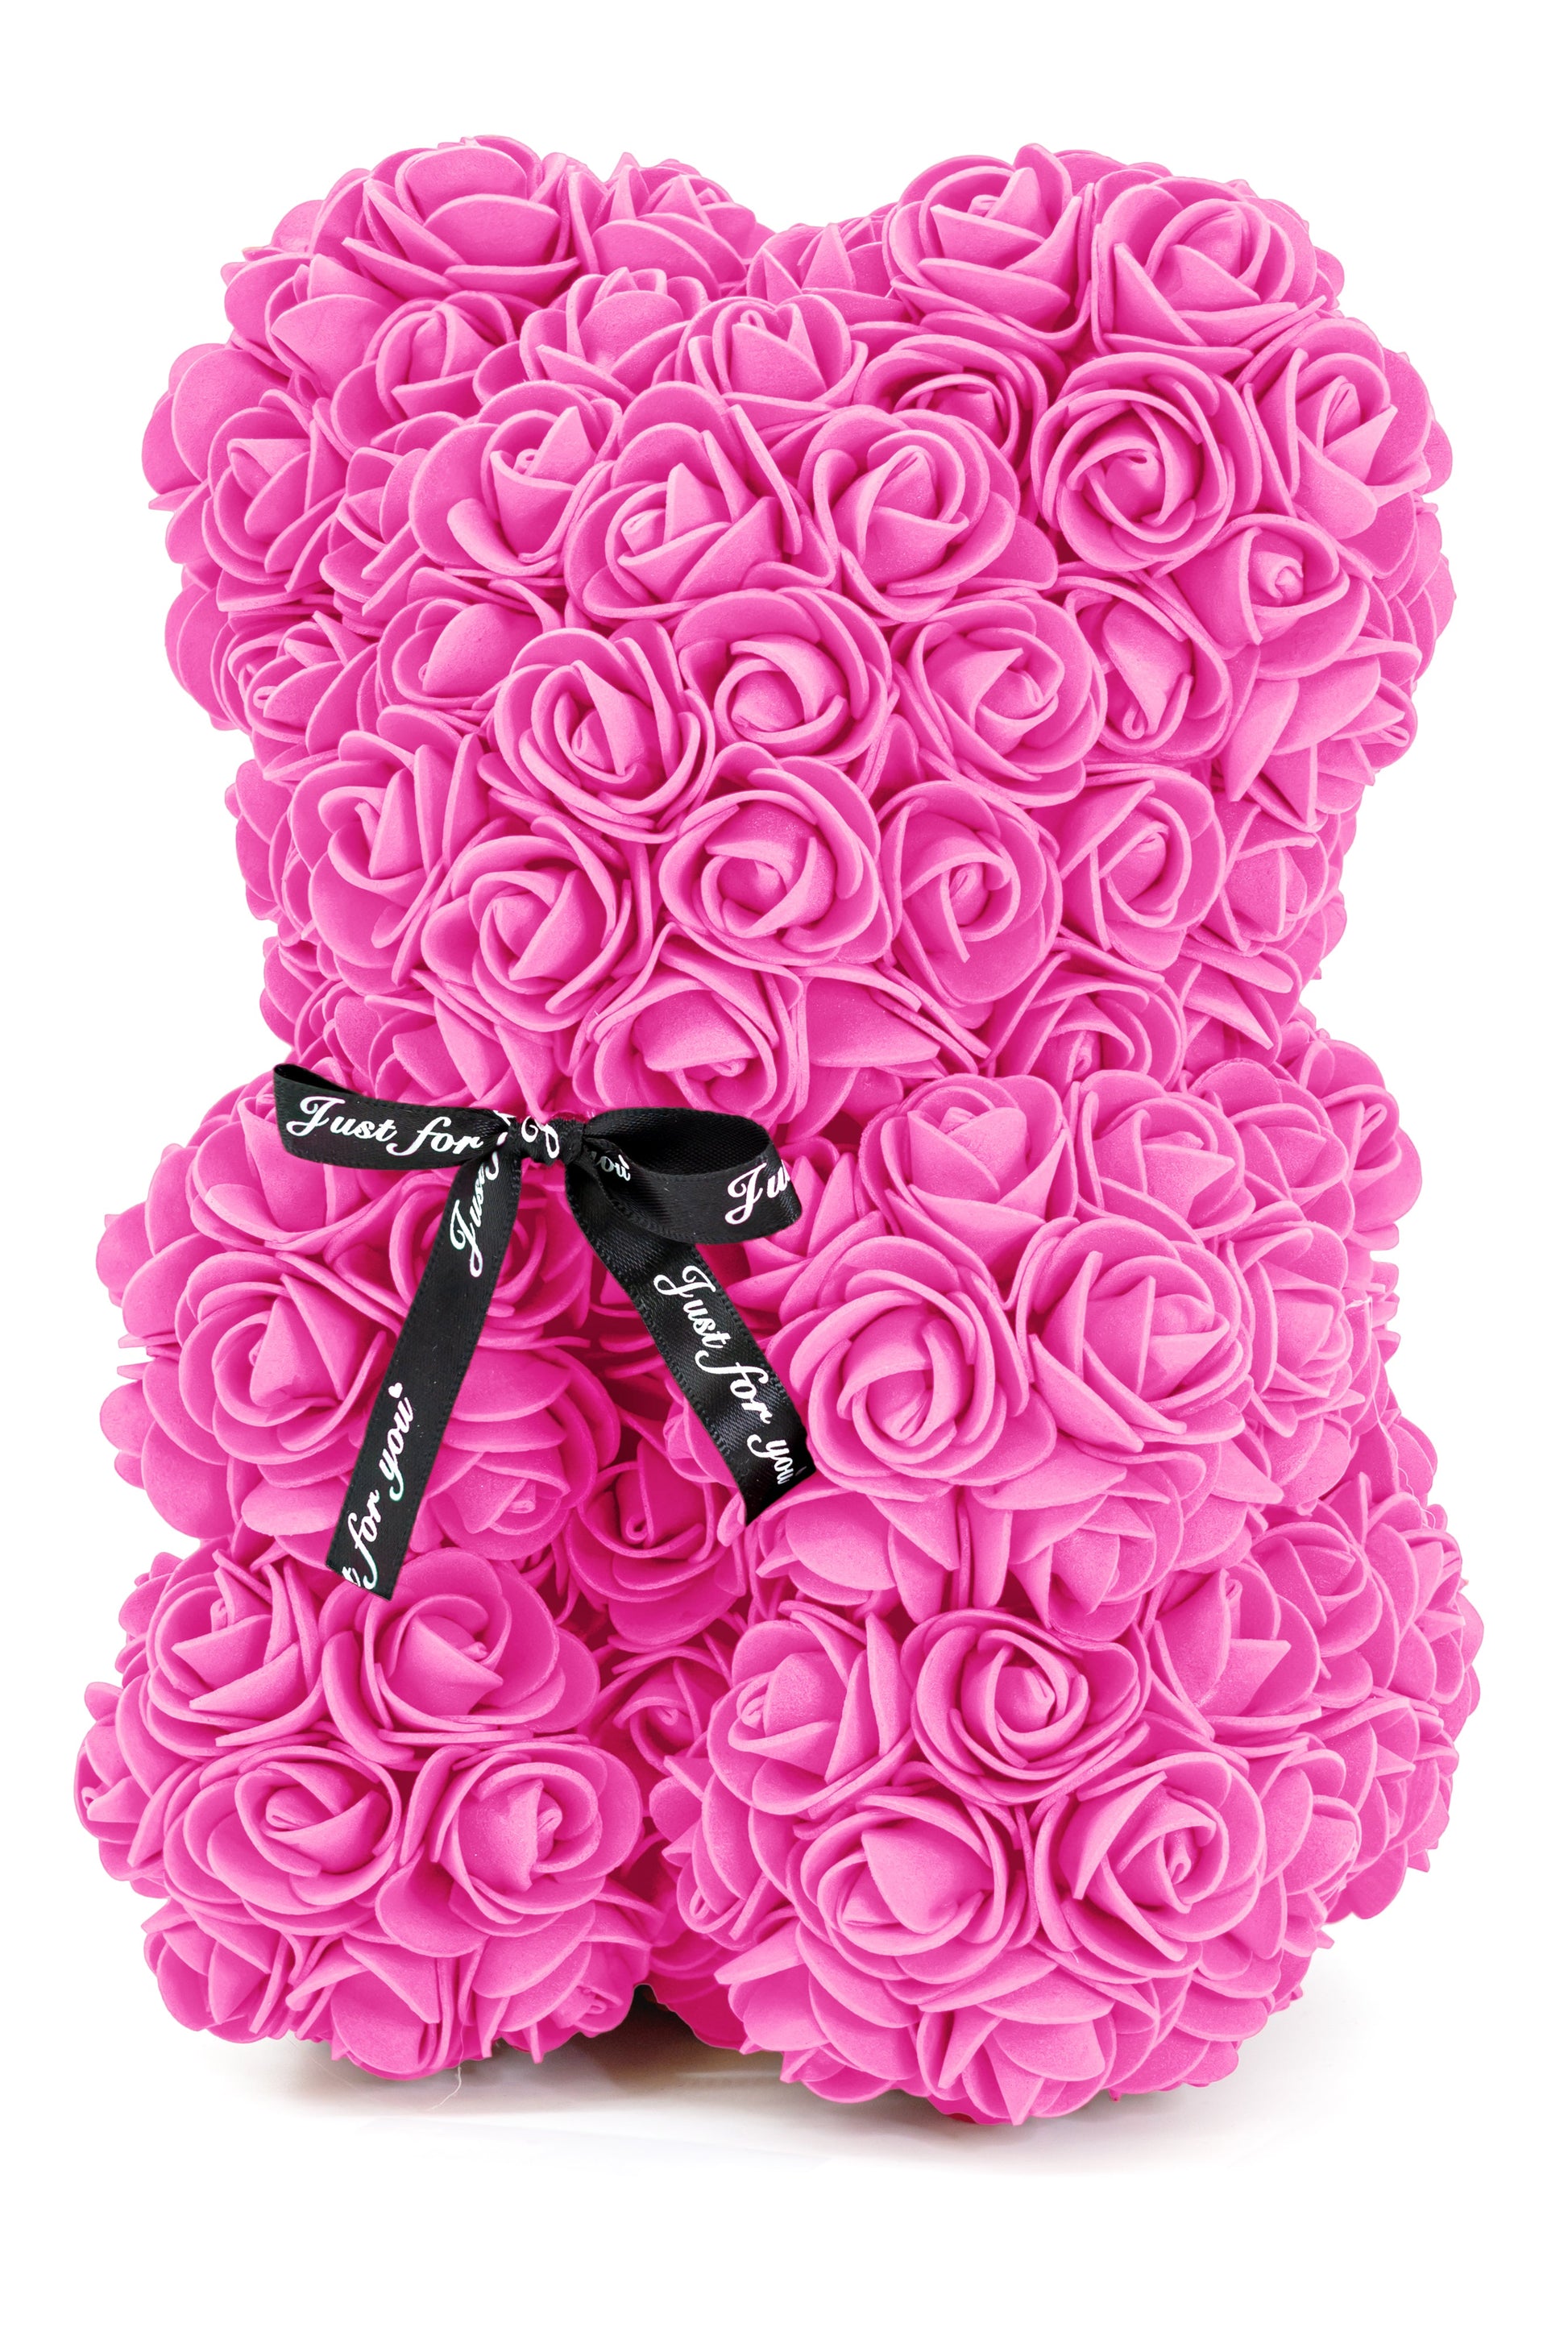 A bear shaped product covered in foam roses in the color pink.